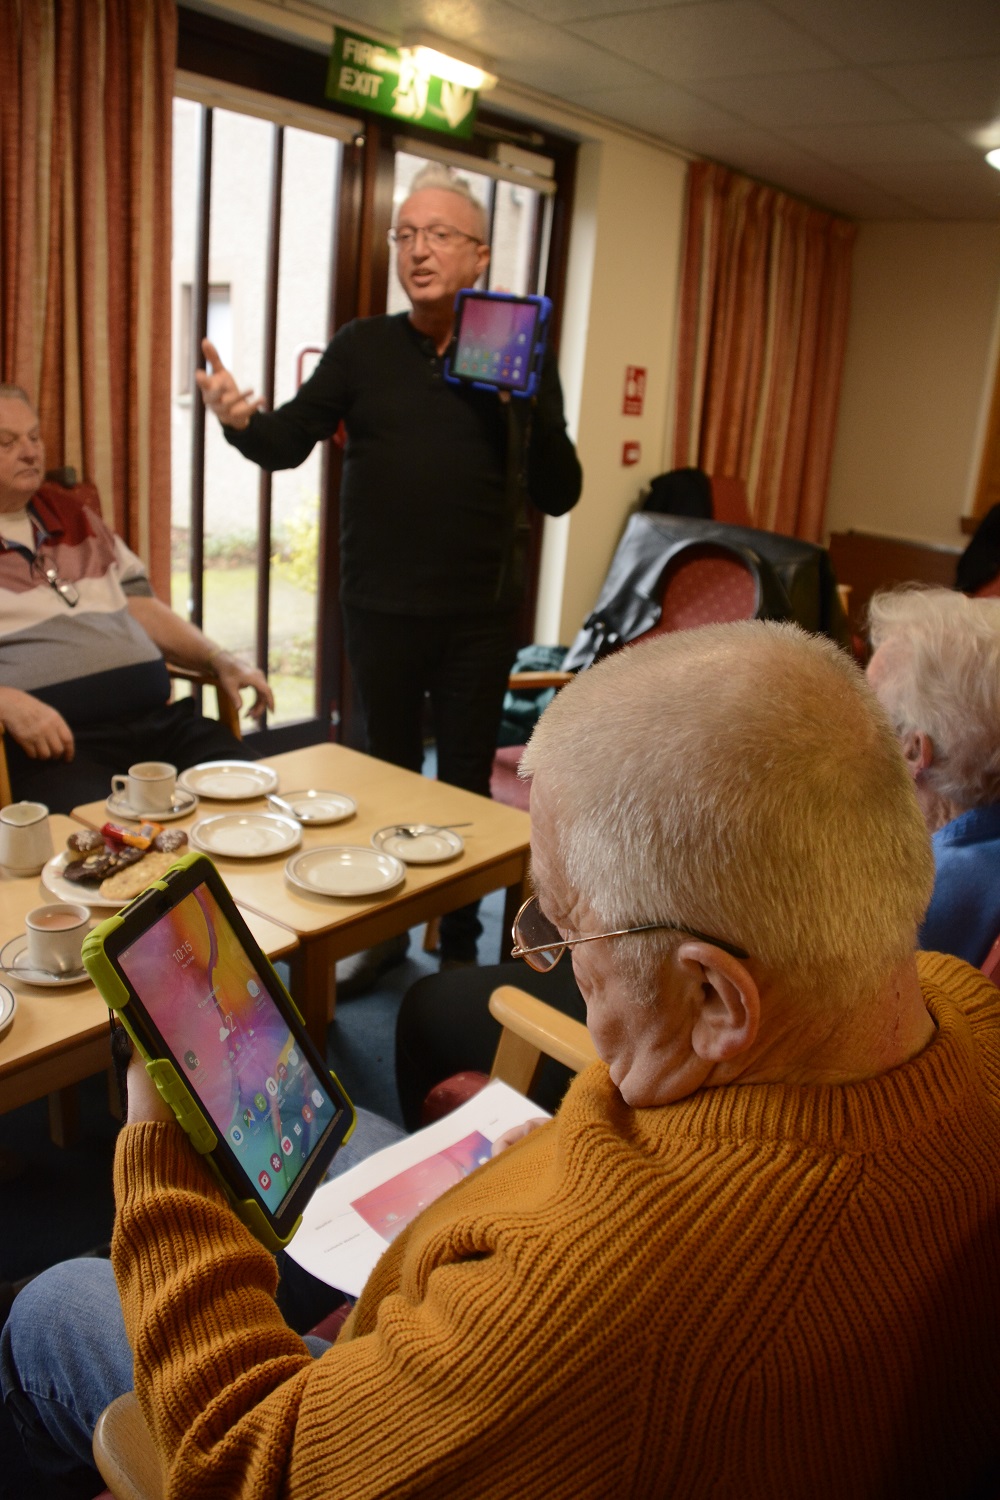 Digital inclusion project launched in Aberdeenshire